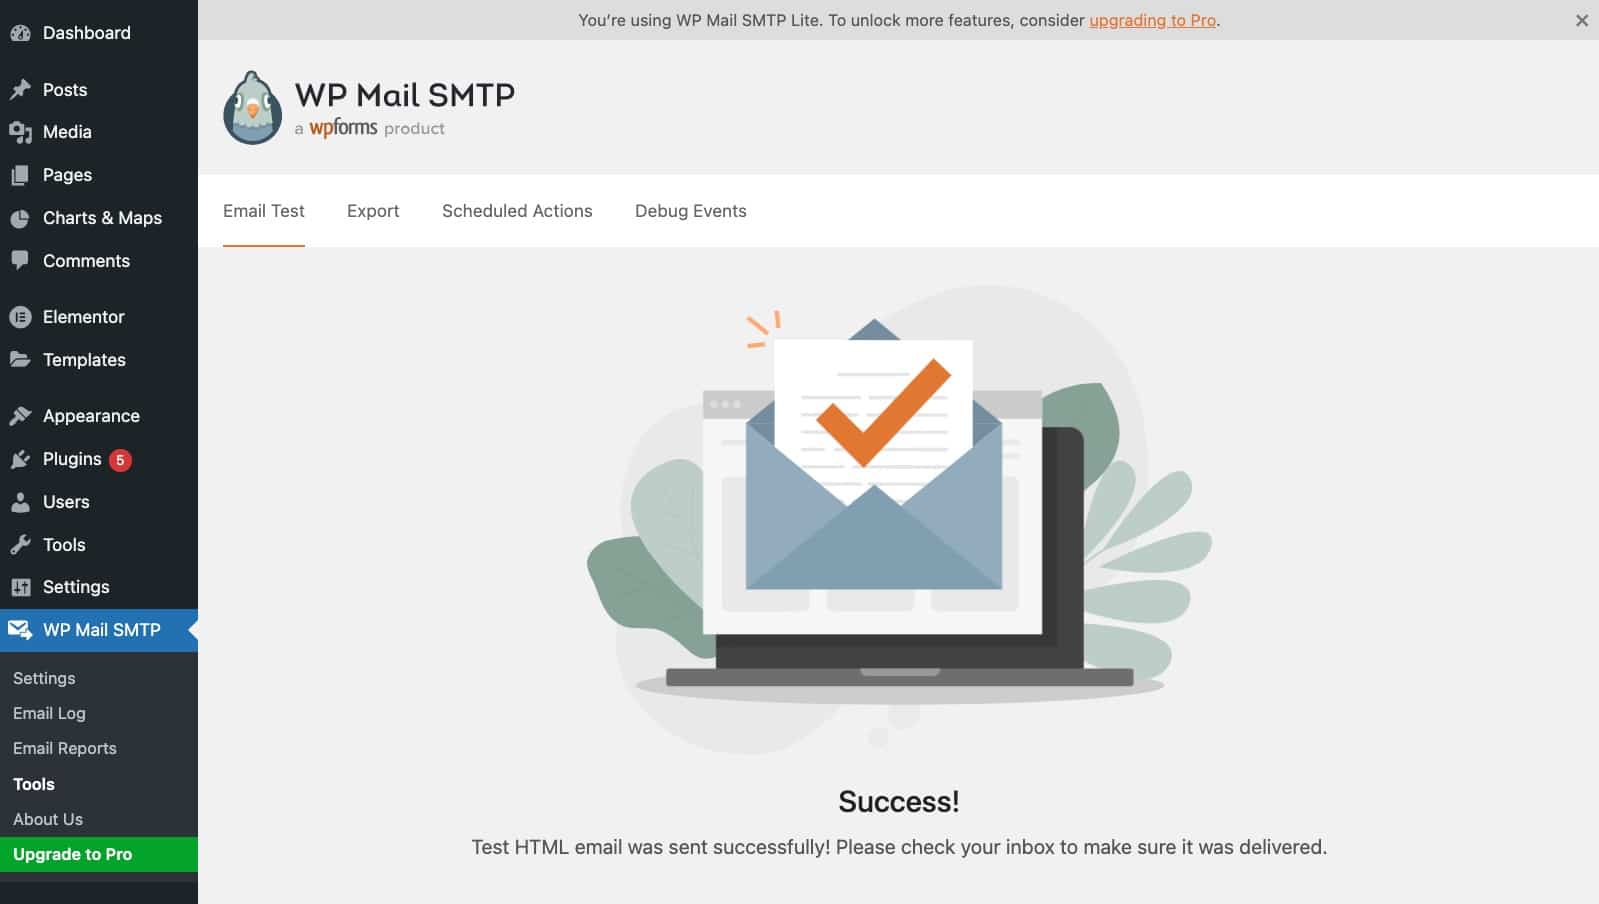 WP Mail SMTP success email.